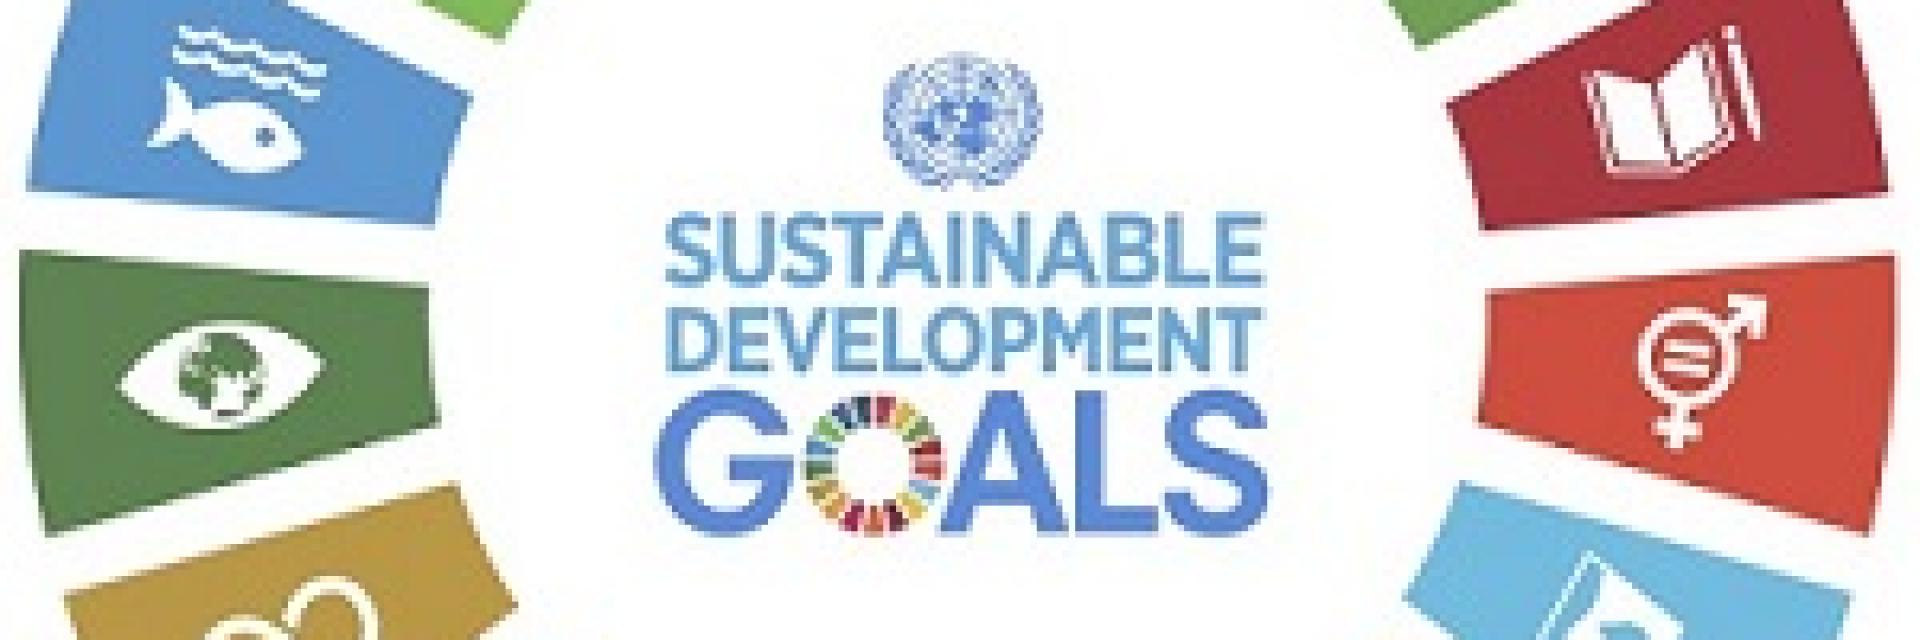 Fifth session of the Africa Regional Forum on Sustainable Development